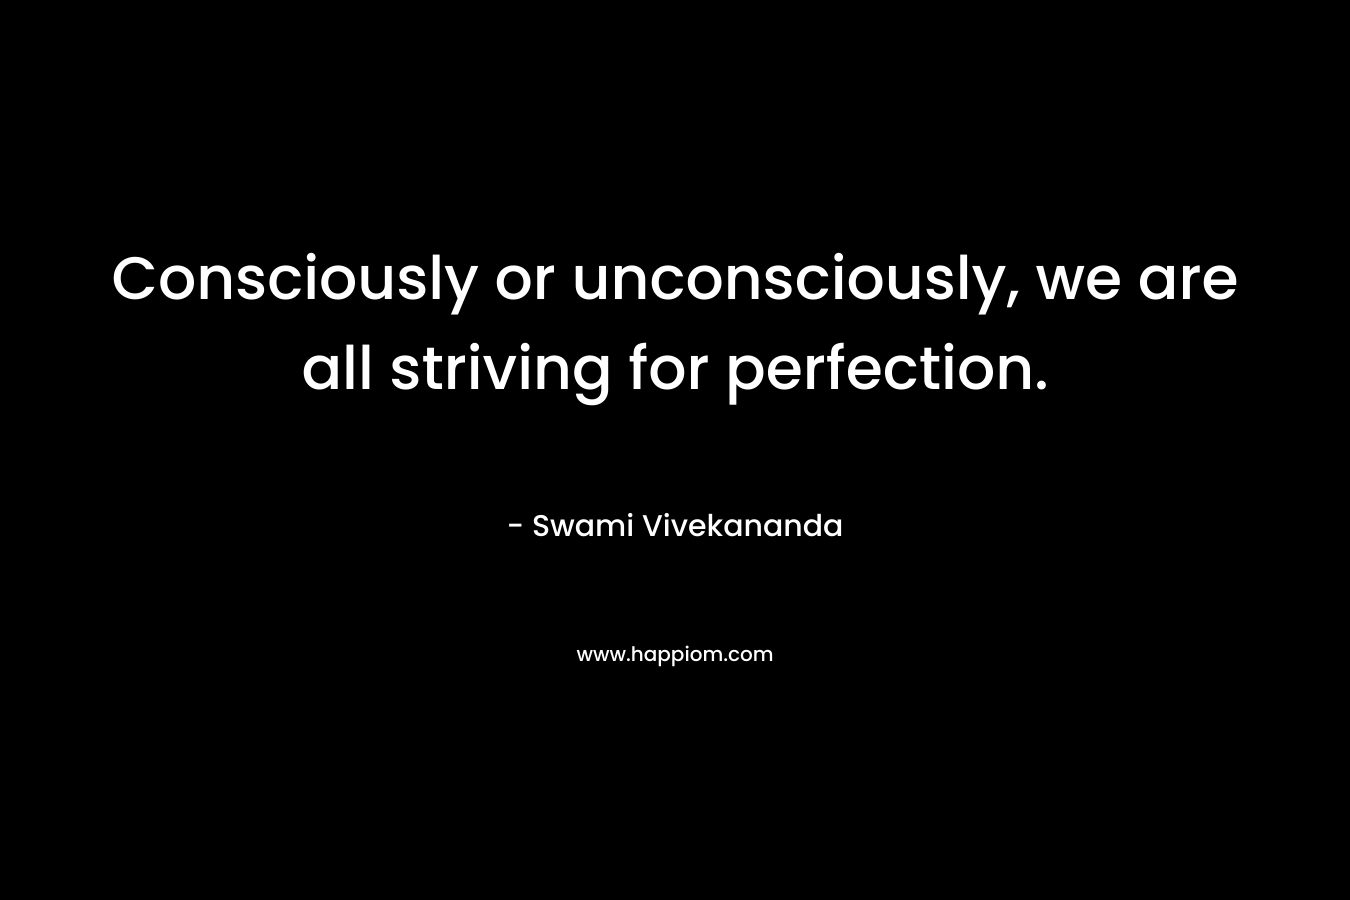 Consciously or unconsciously, we are all striving for perfection.